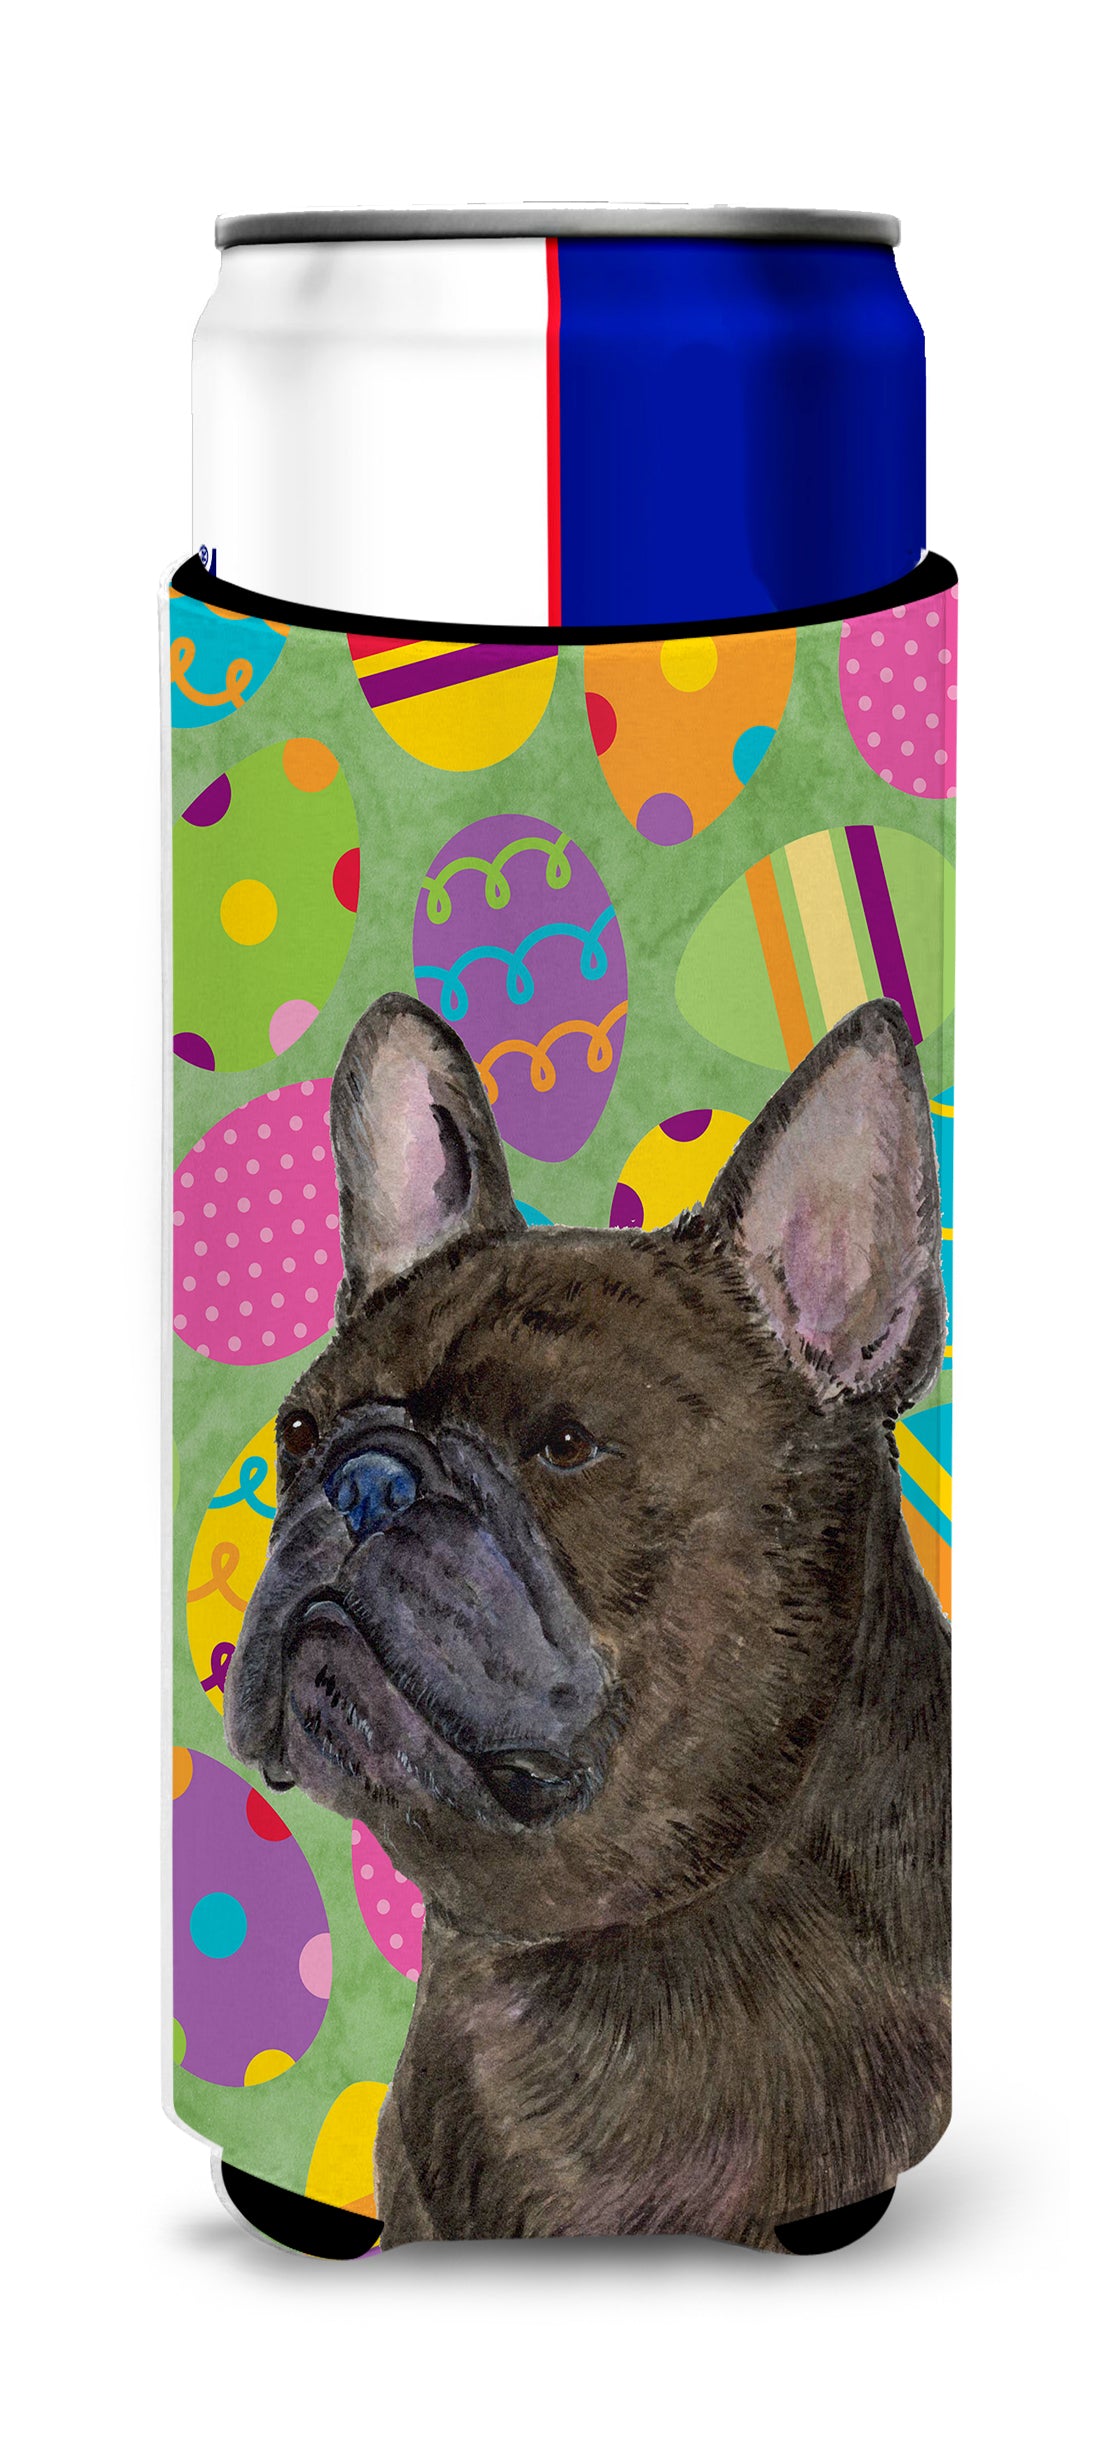 French Bulldog Easter Eggtravaganza Ultra Beverage Insulators for slim cans SS4864MUK.